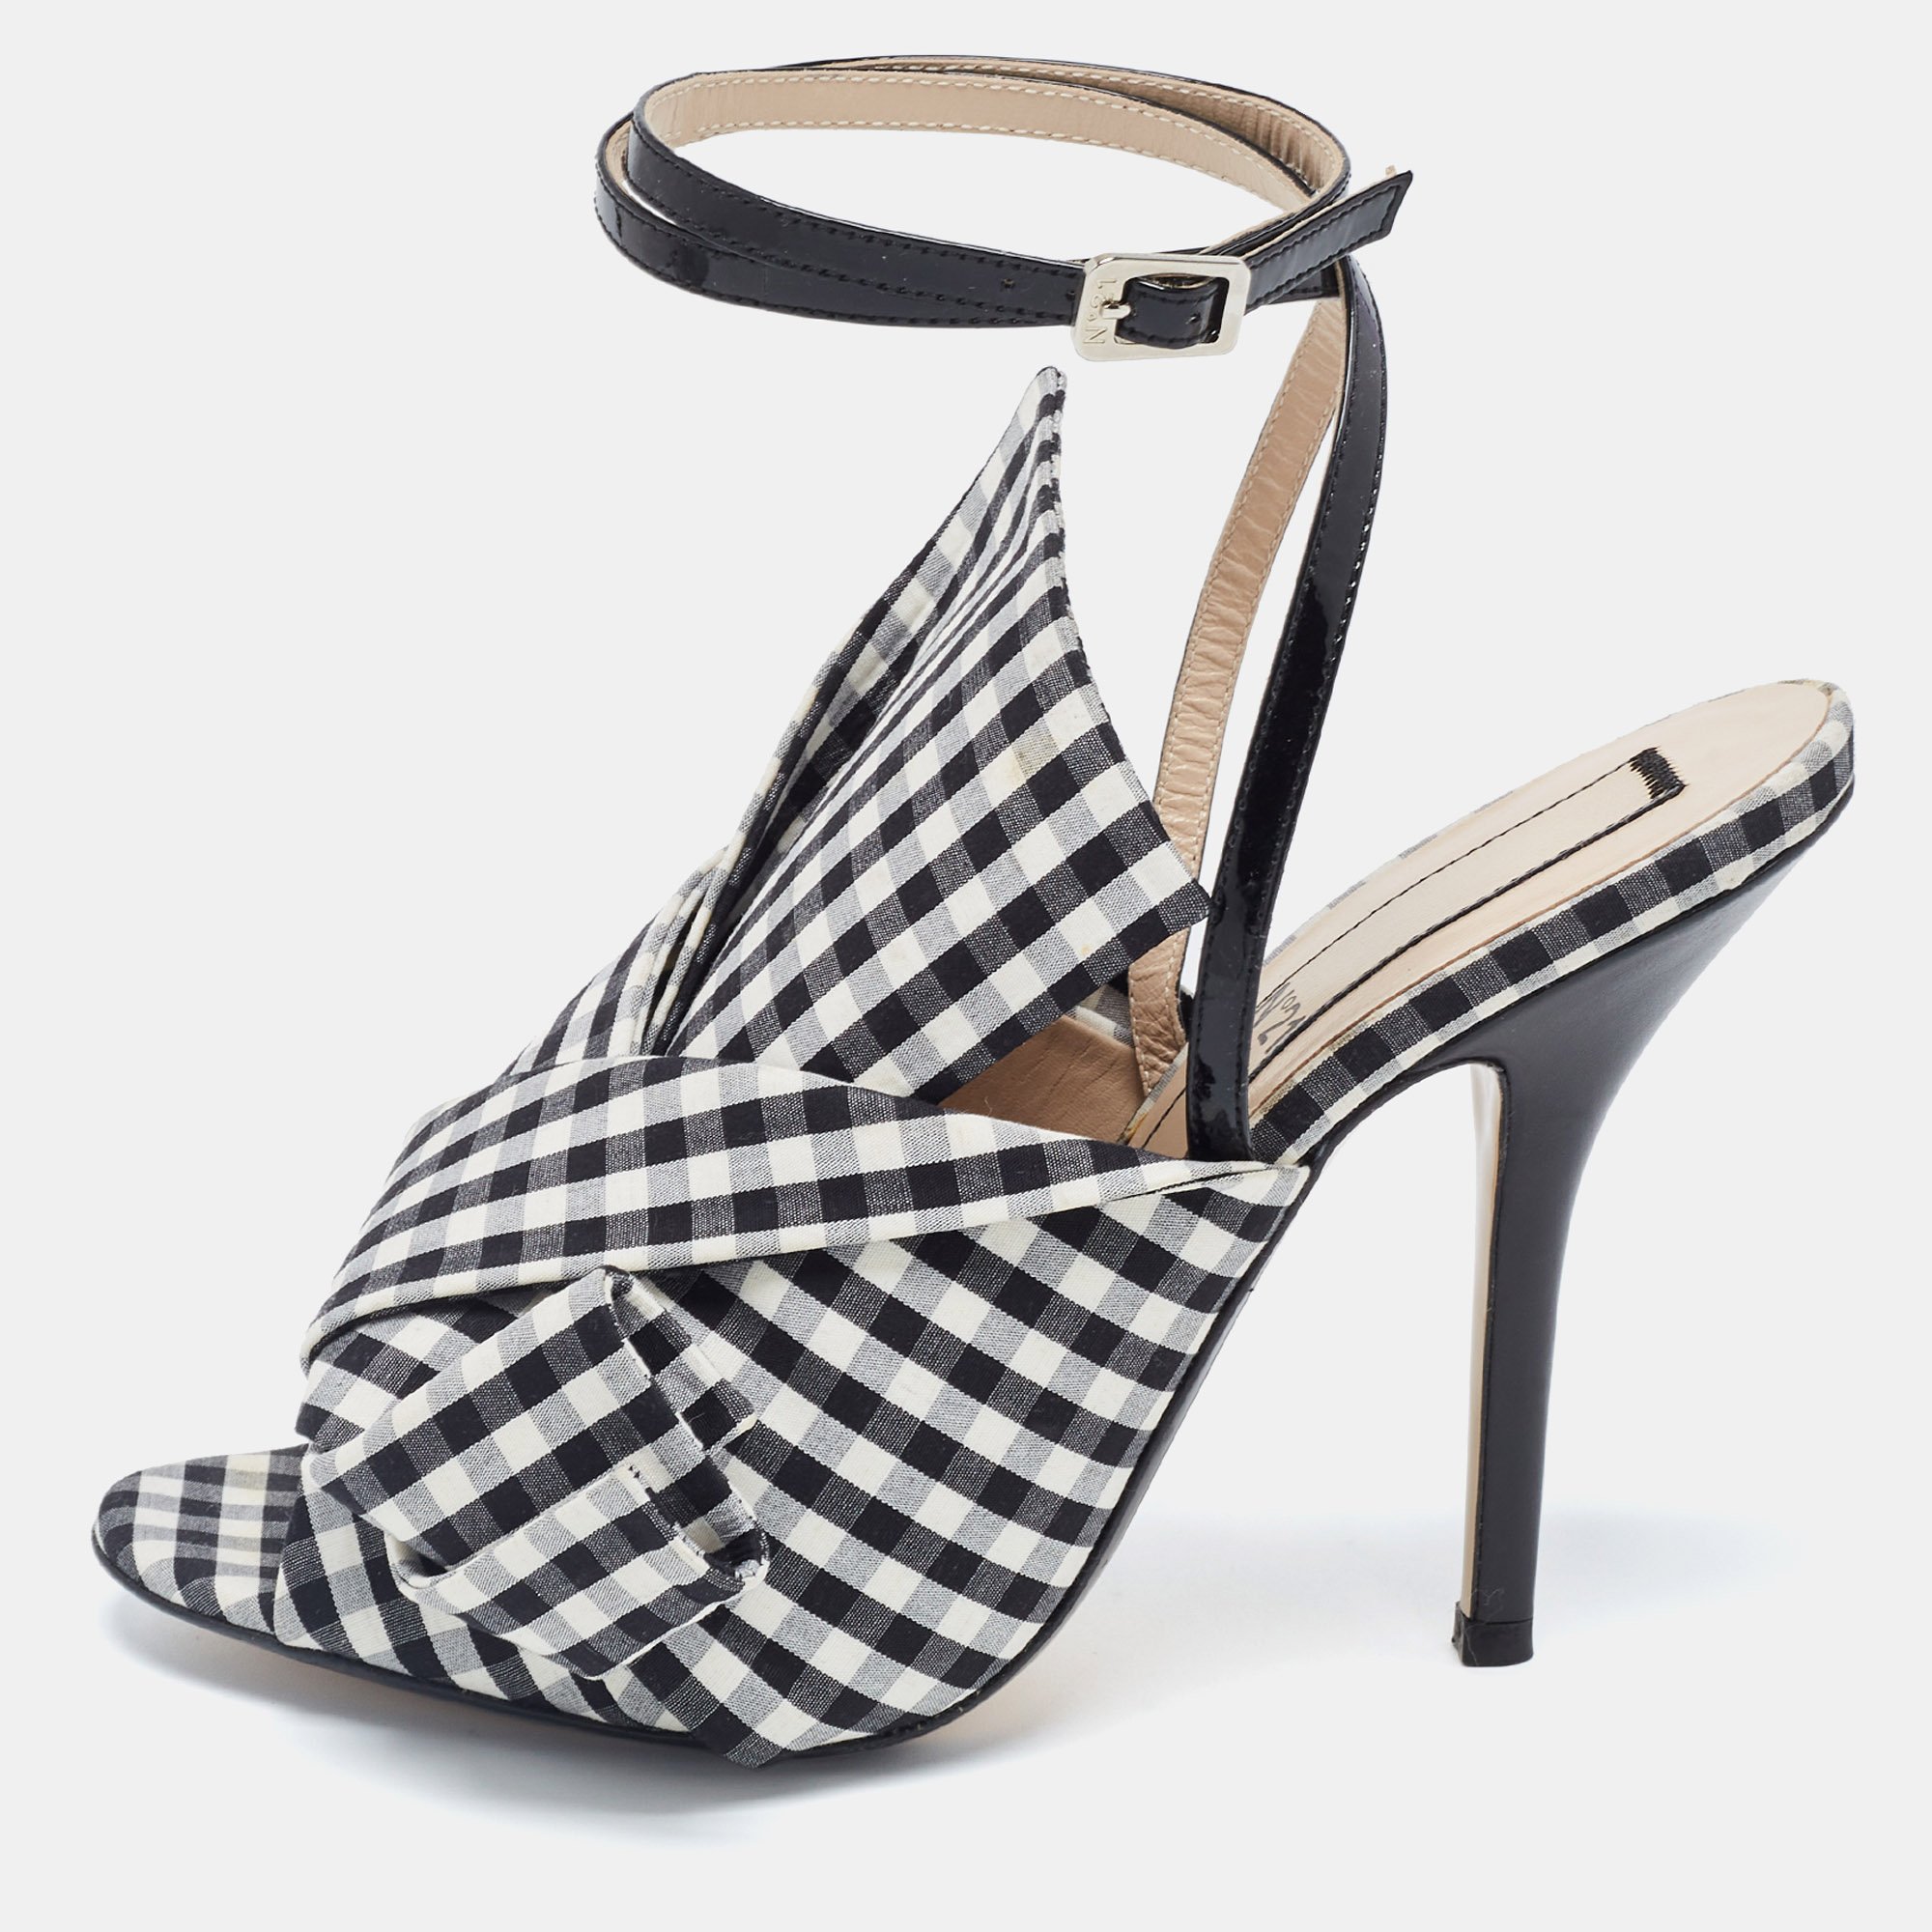 N21 black/white fabric gingham ankle wrap peep toe sandals size 38.5